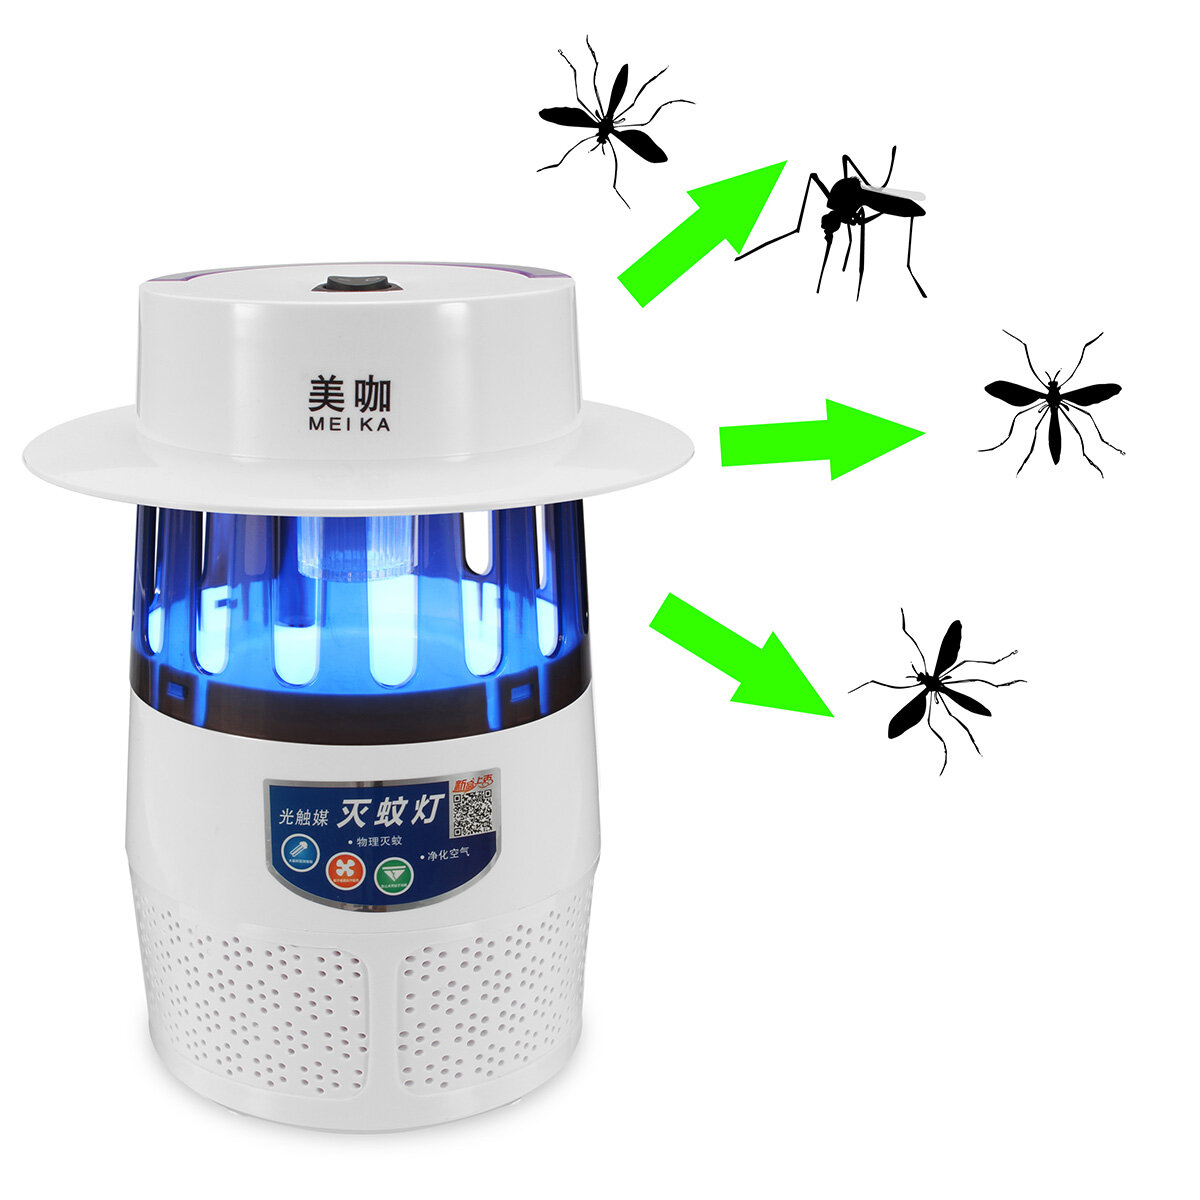 

5W LED USB Mosquito Dispeller Repeller Mosquito Killer Lamp Bulb Electric Bug Insect Repellent Zapper Pest Trap Light Ou